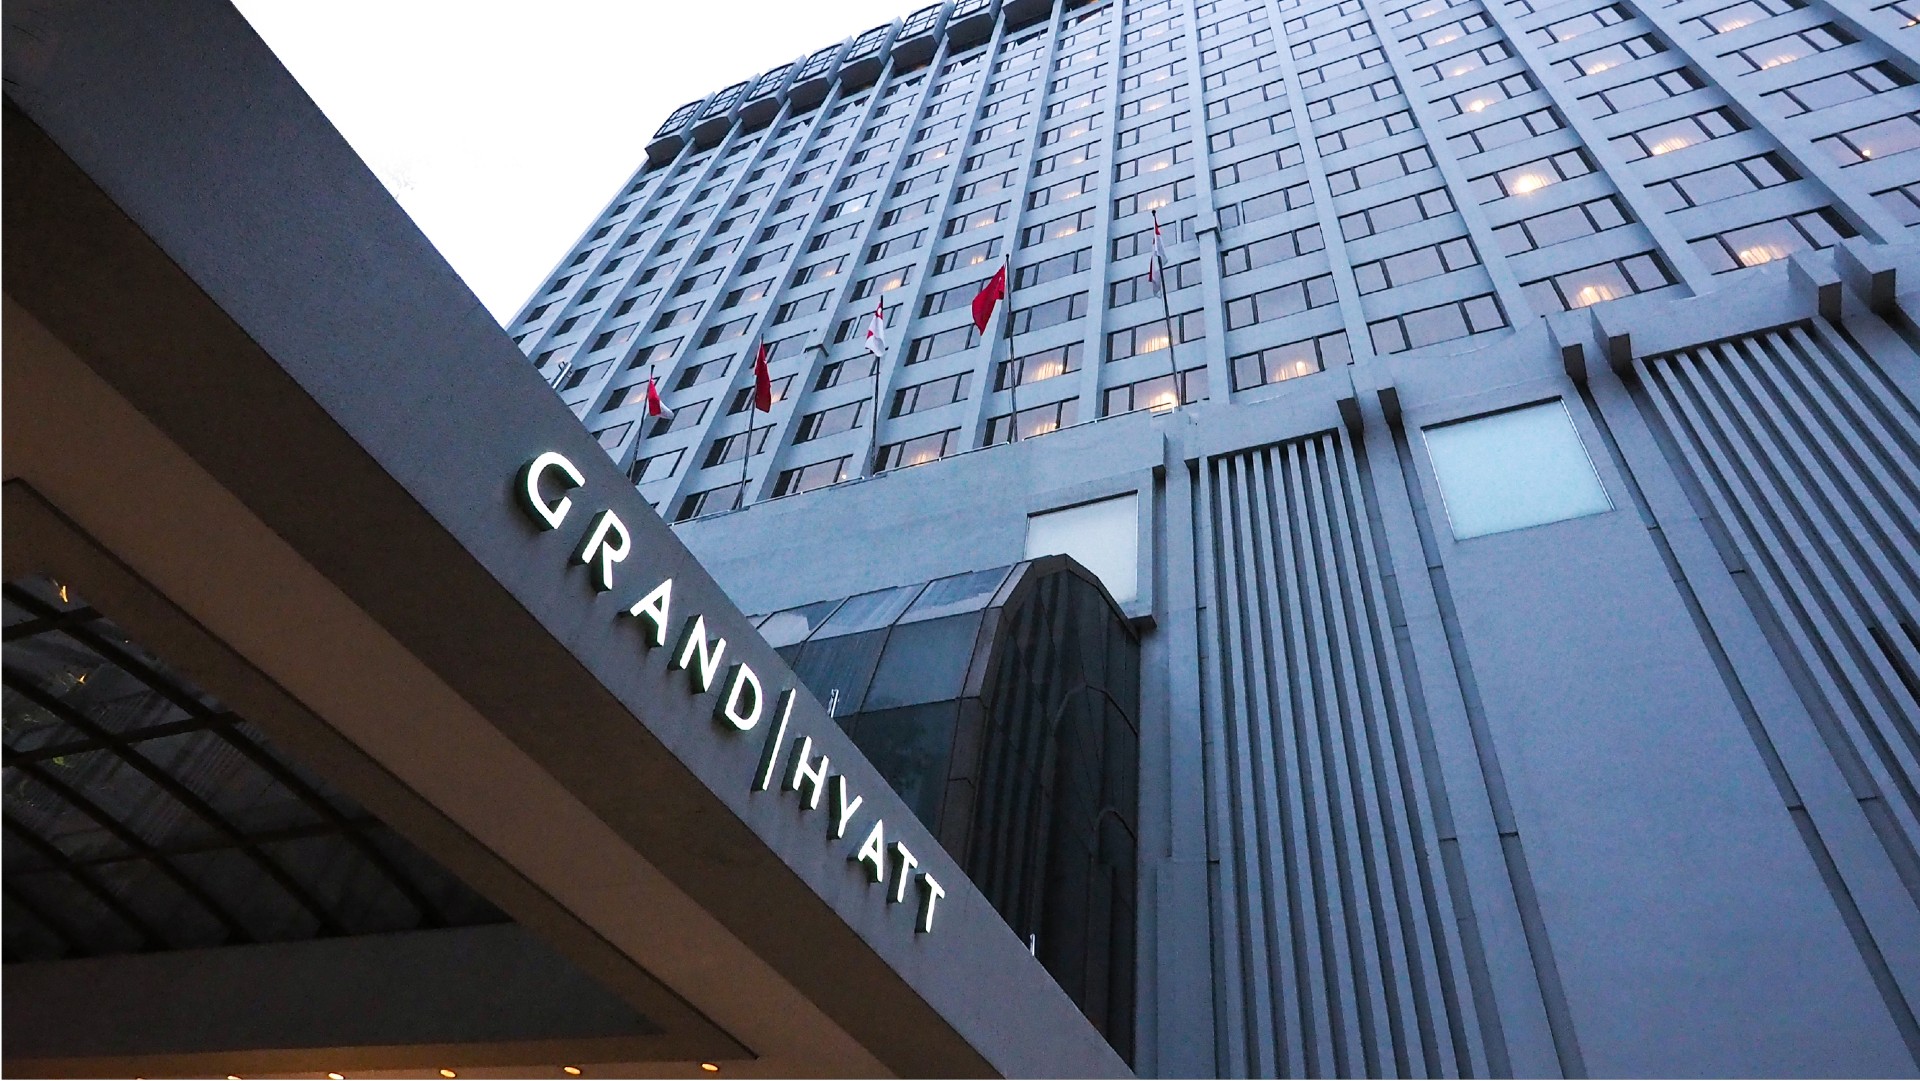 The Grand Hyatt Singapore hotel building, one of MDA's Compendium of Data Use Cases through the Better Data-Driven Business (BDDB) programme